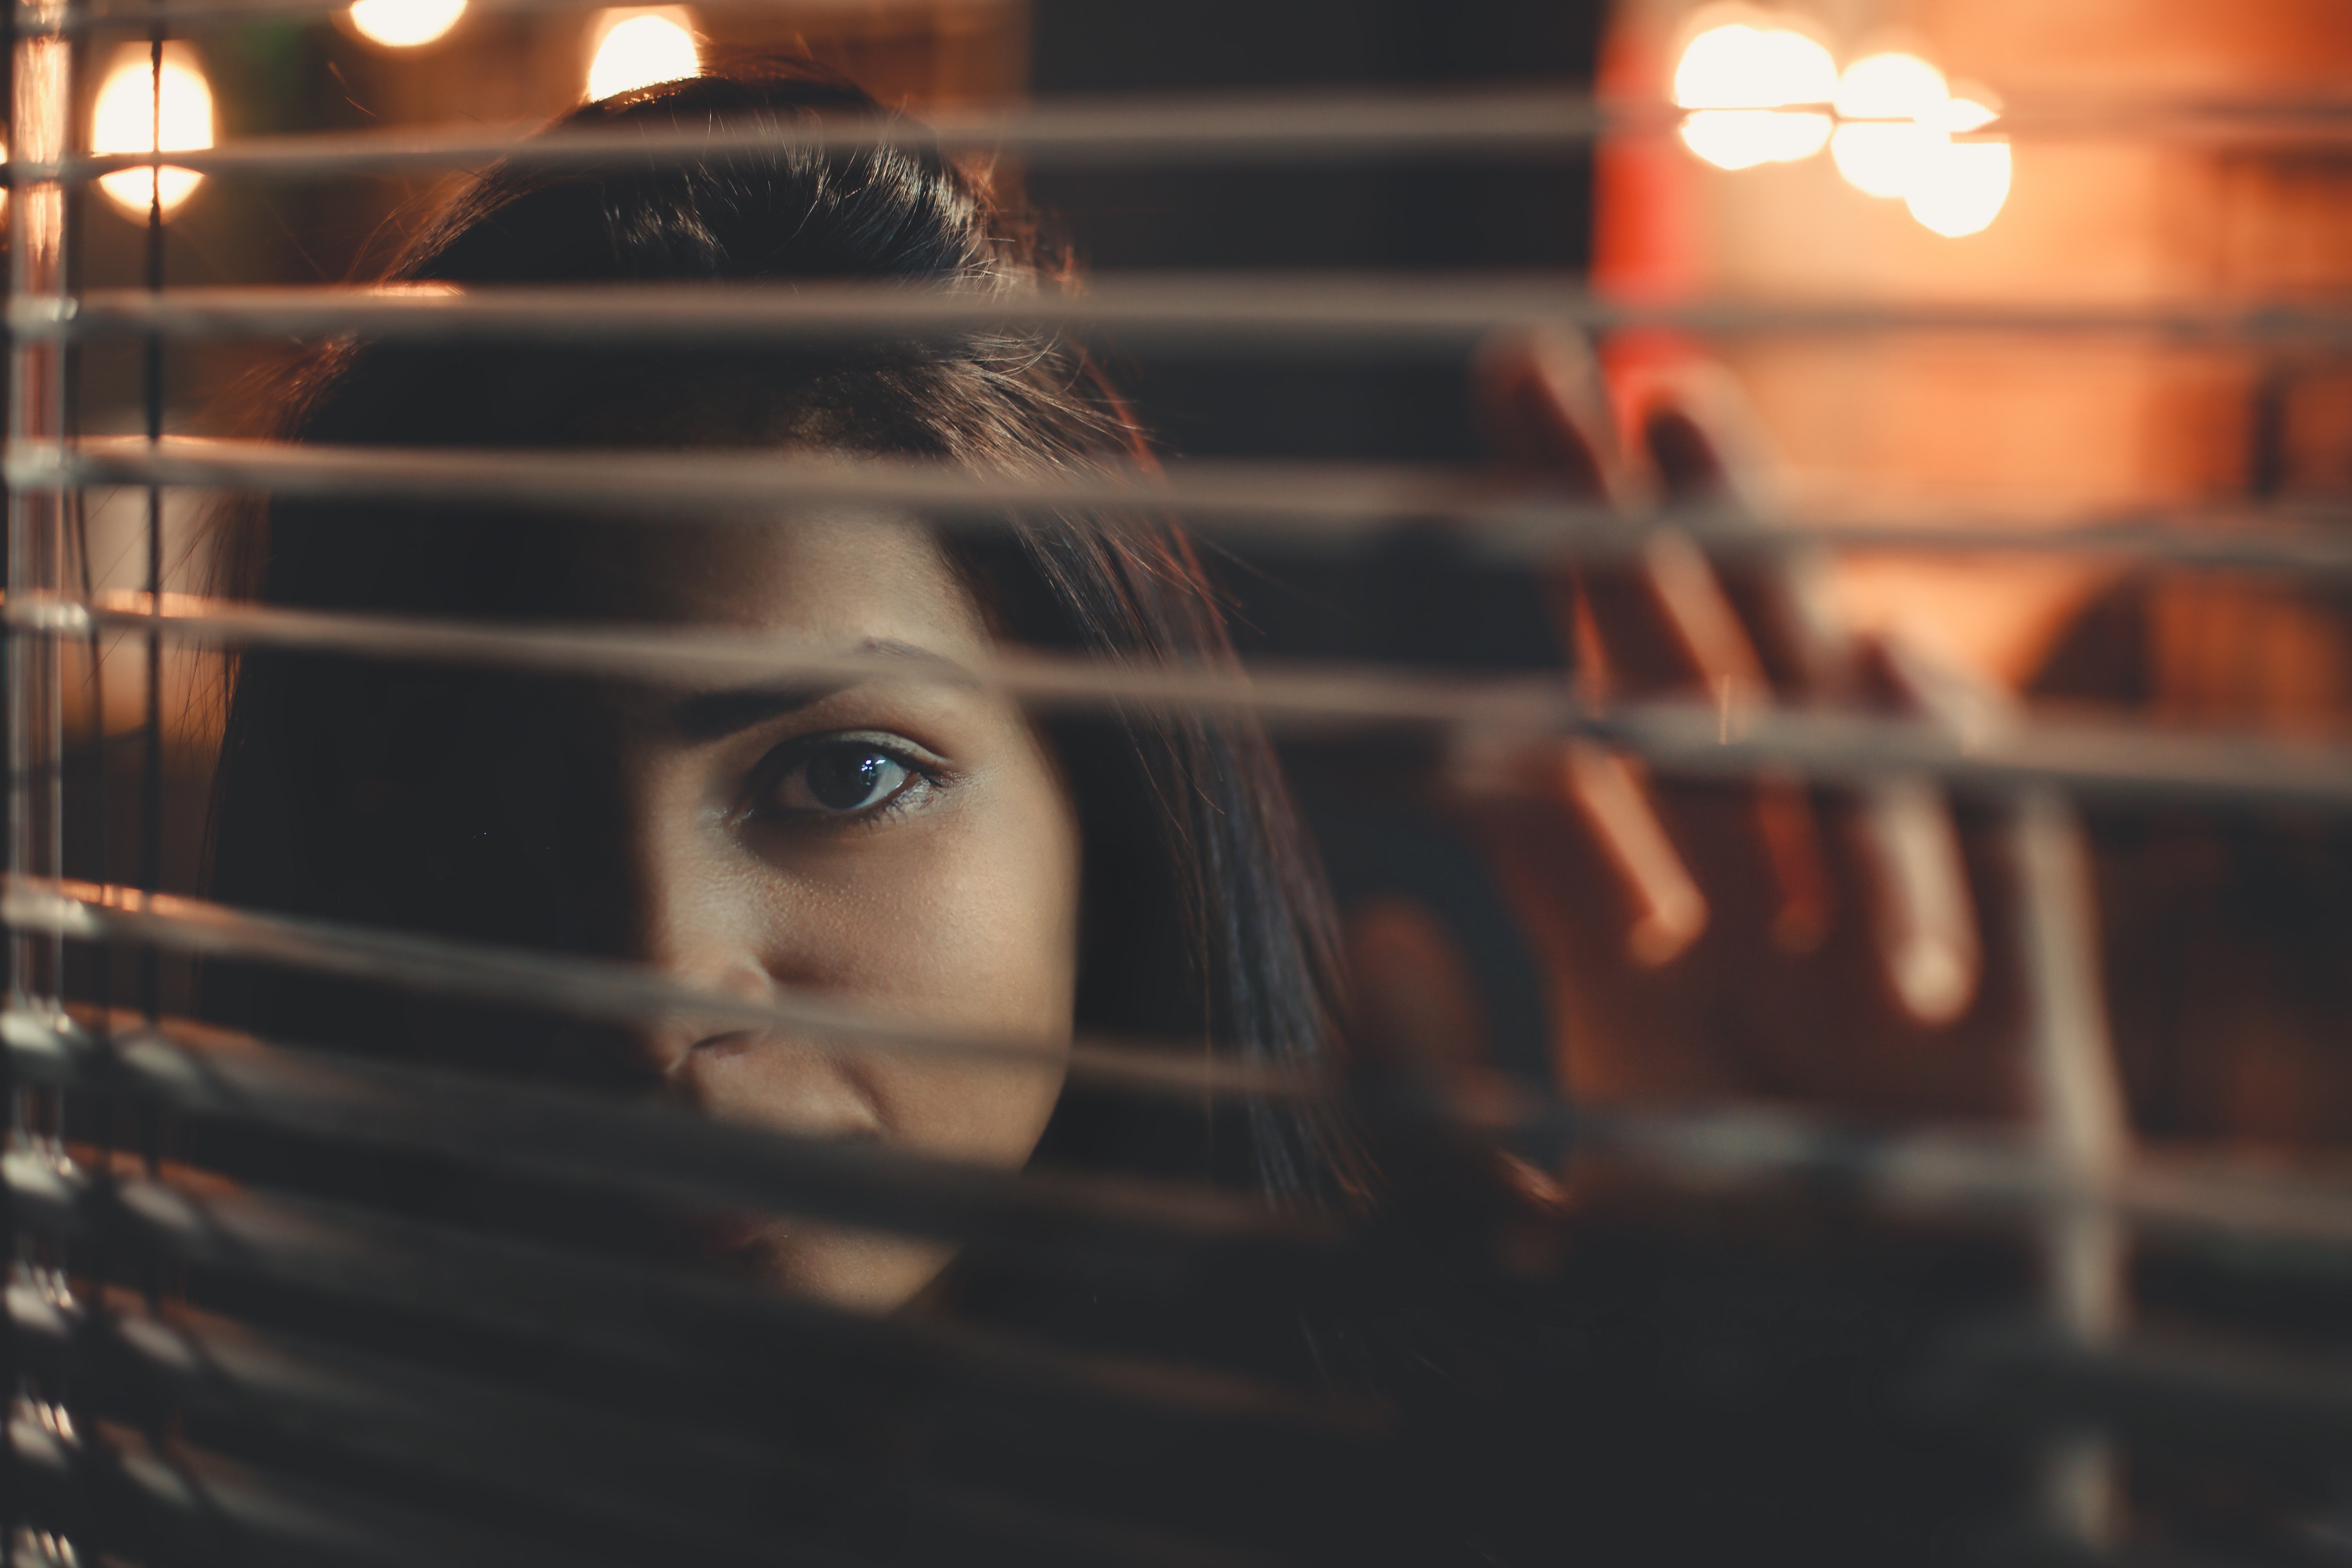 Woman looking through blinds. | Source: Pexels